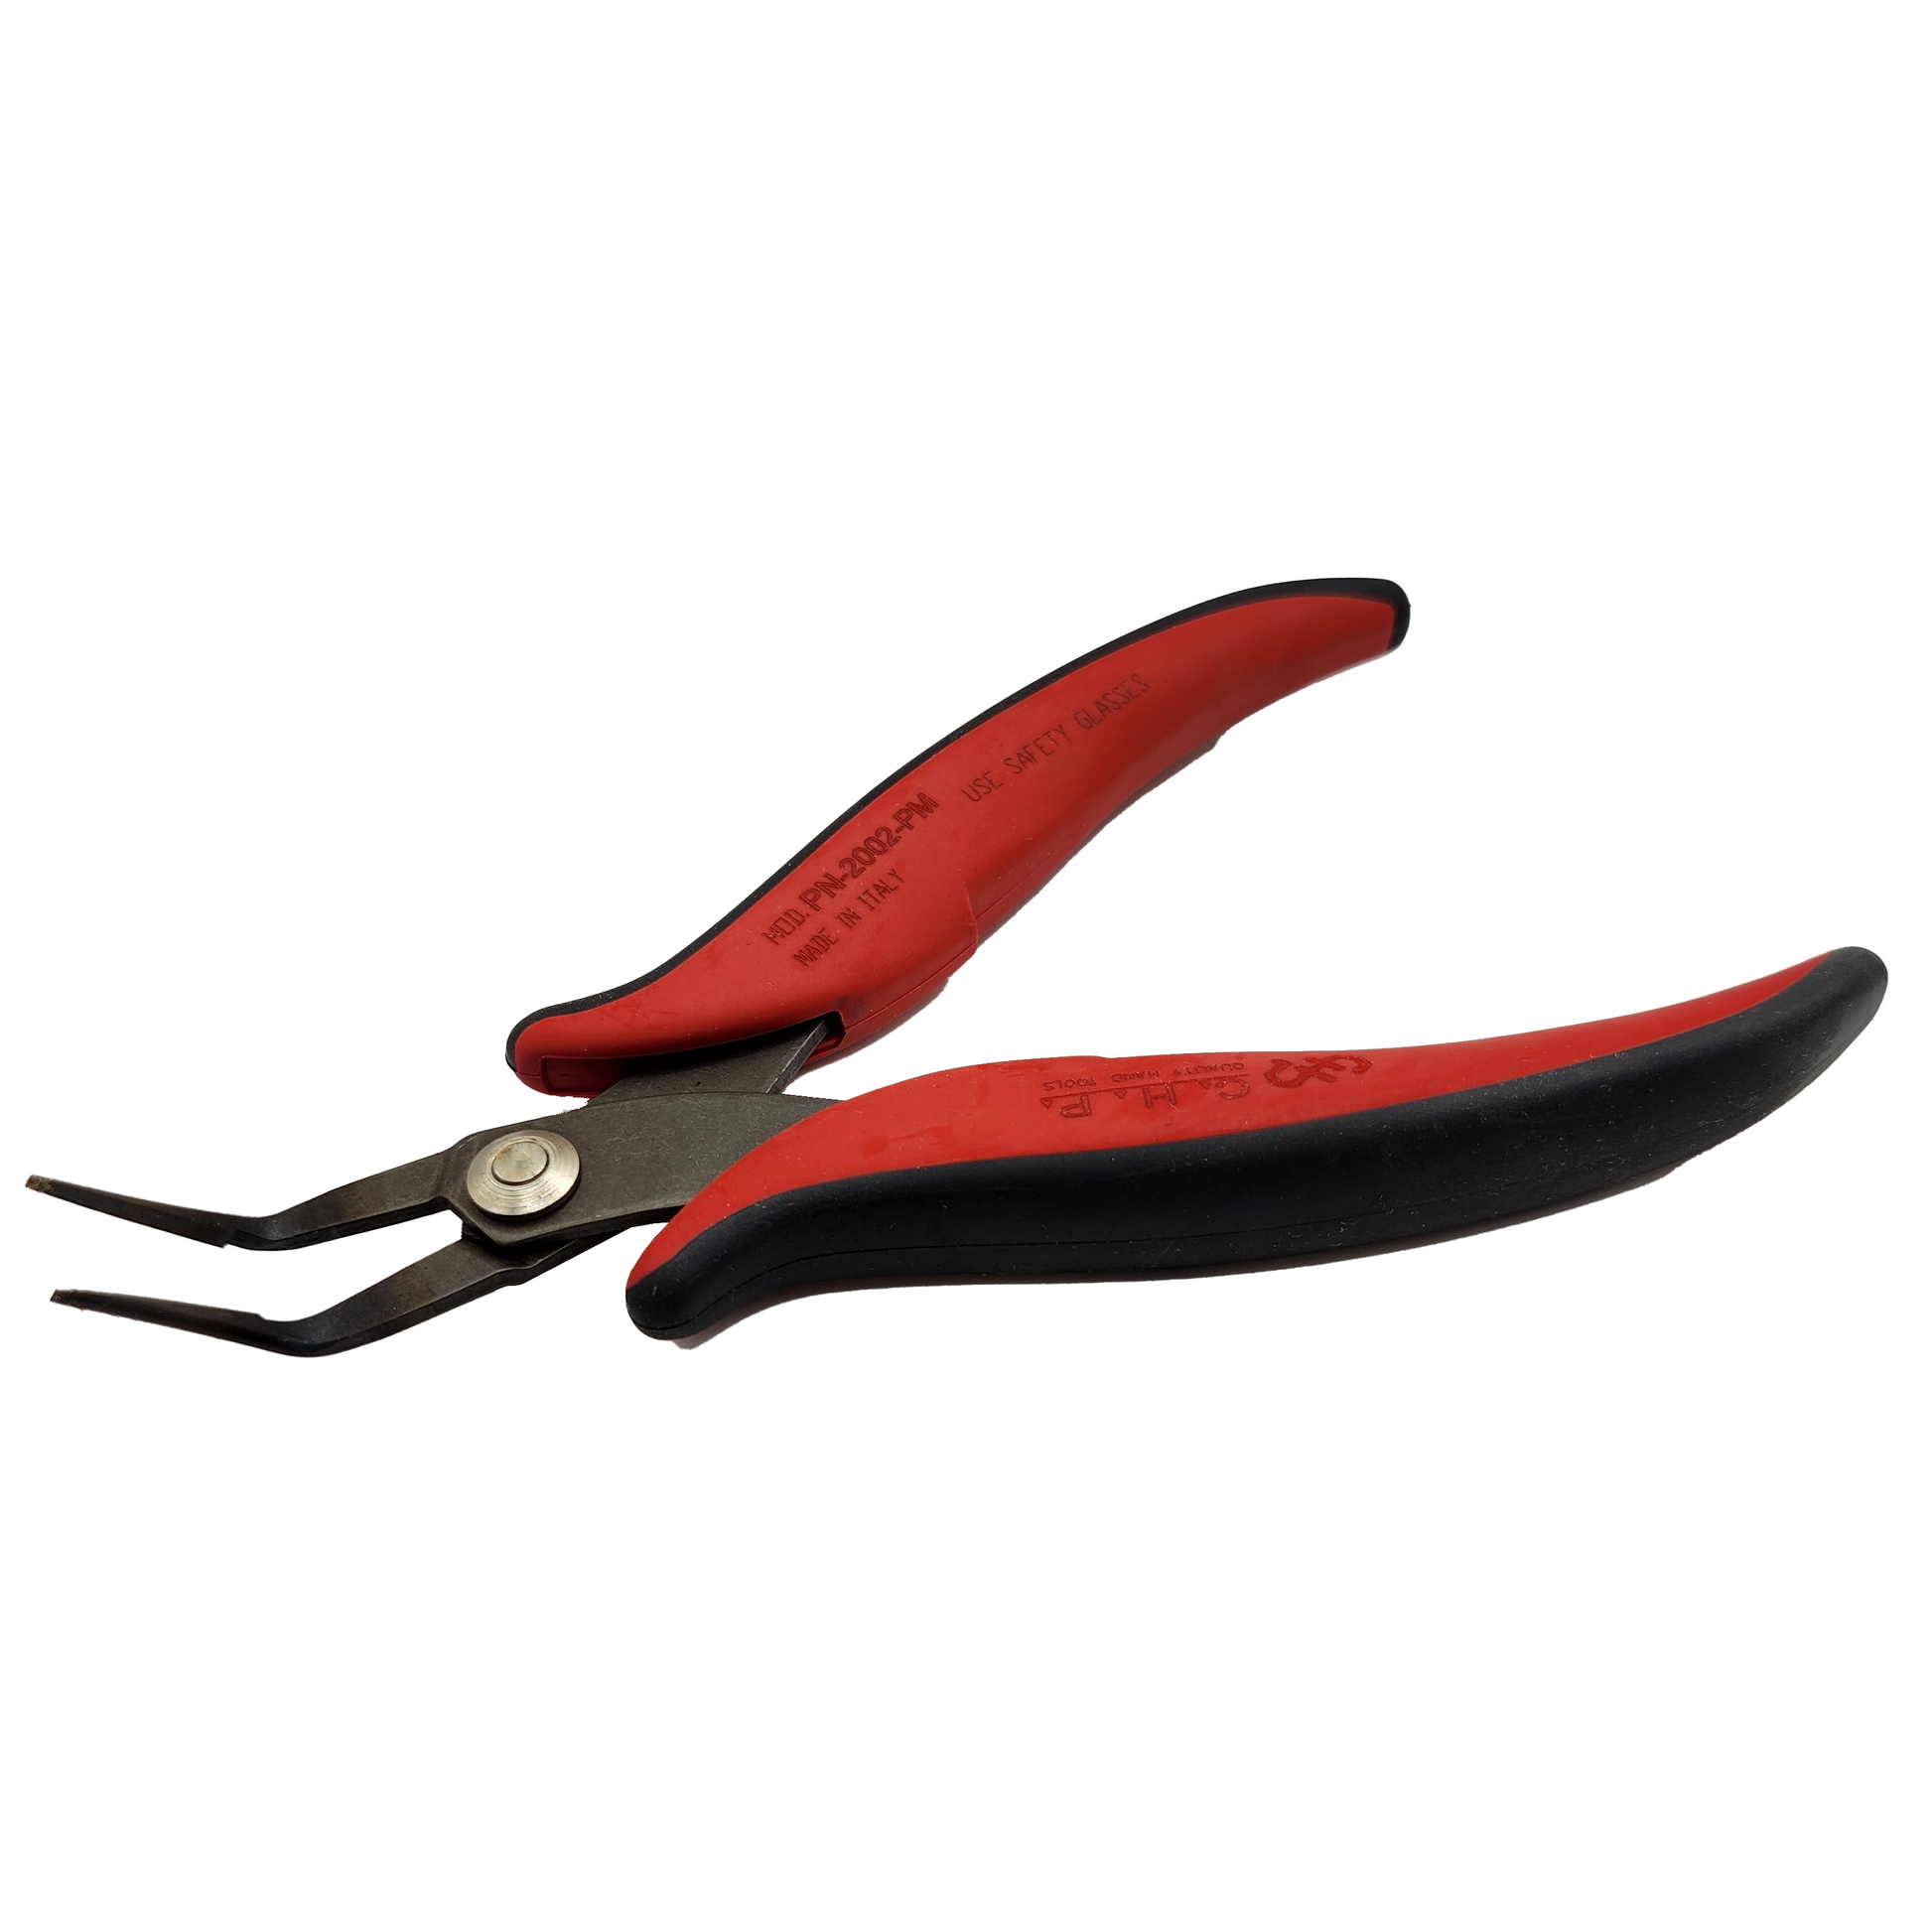 CHP_ CHP PN-2002-PM_ Cutters, Pliers, Multi-Tools_ Hakko Products